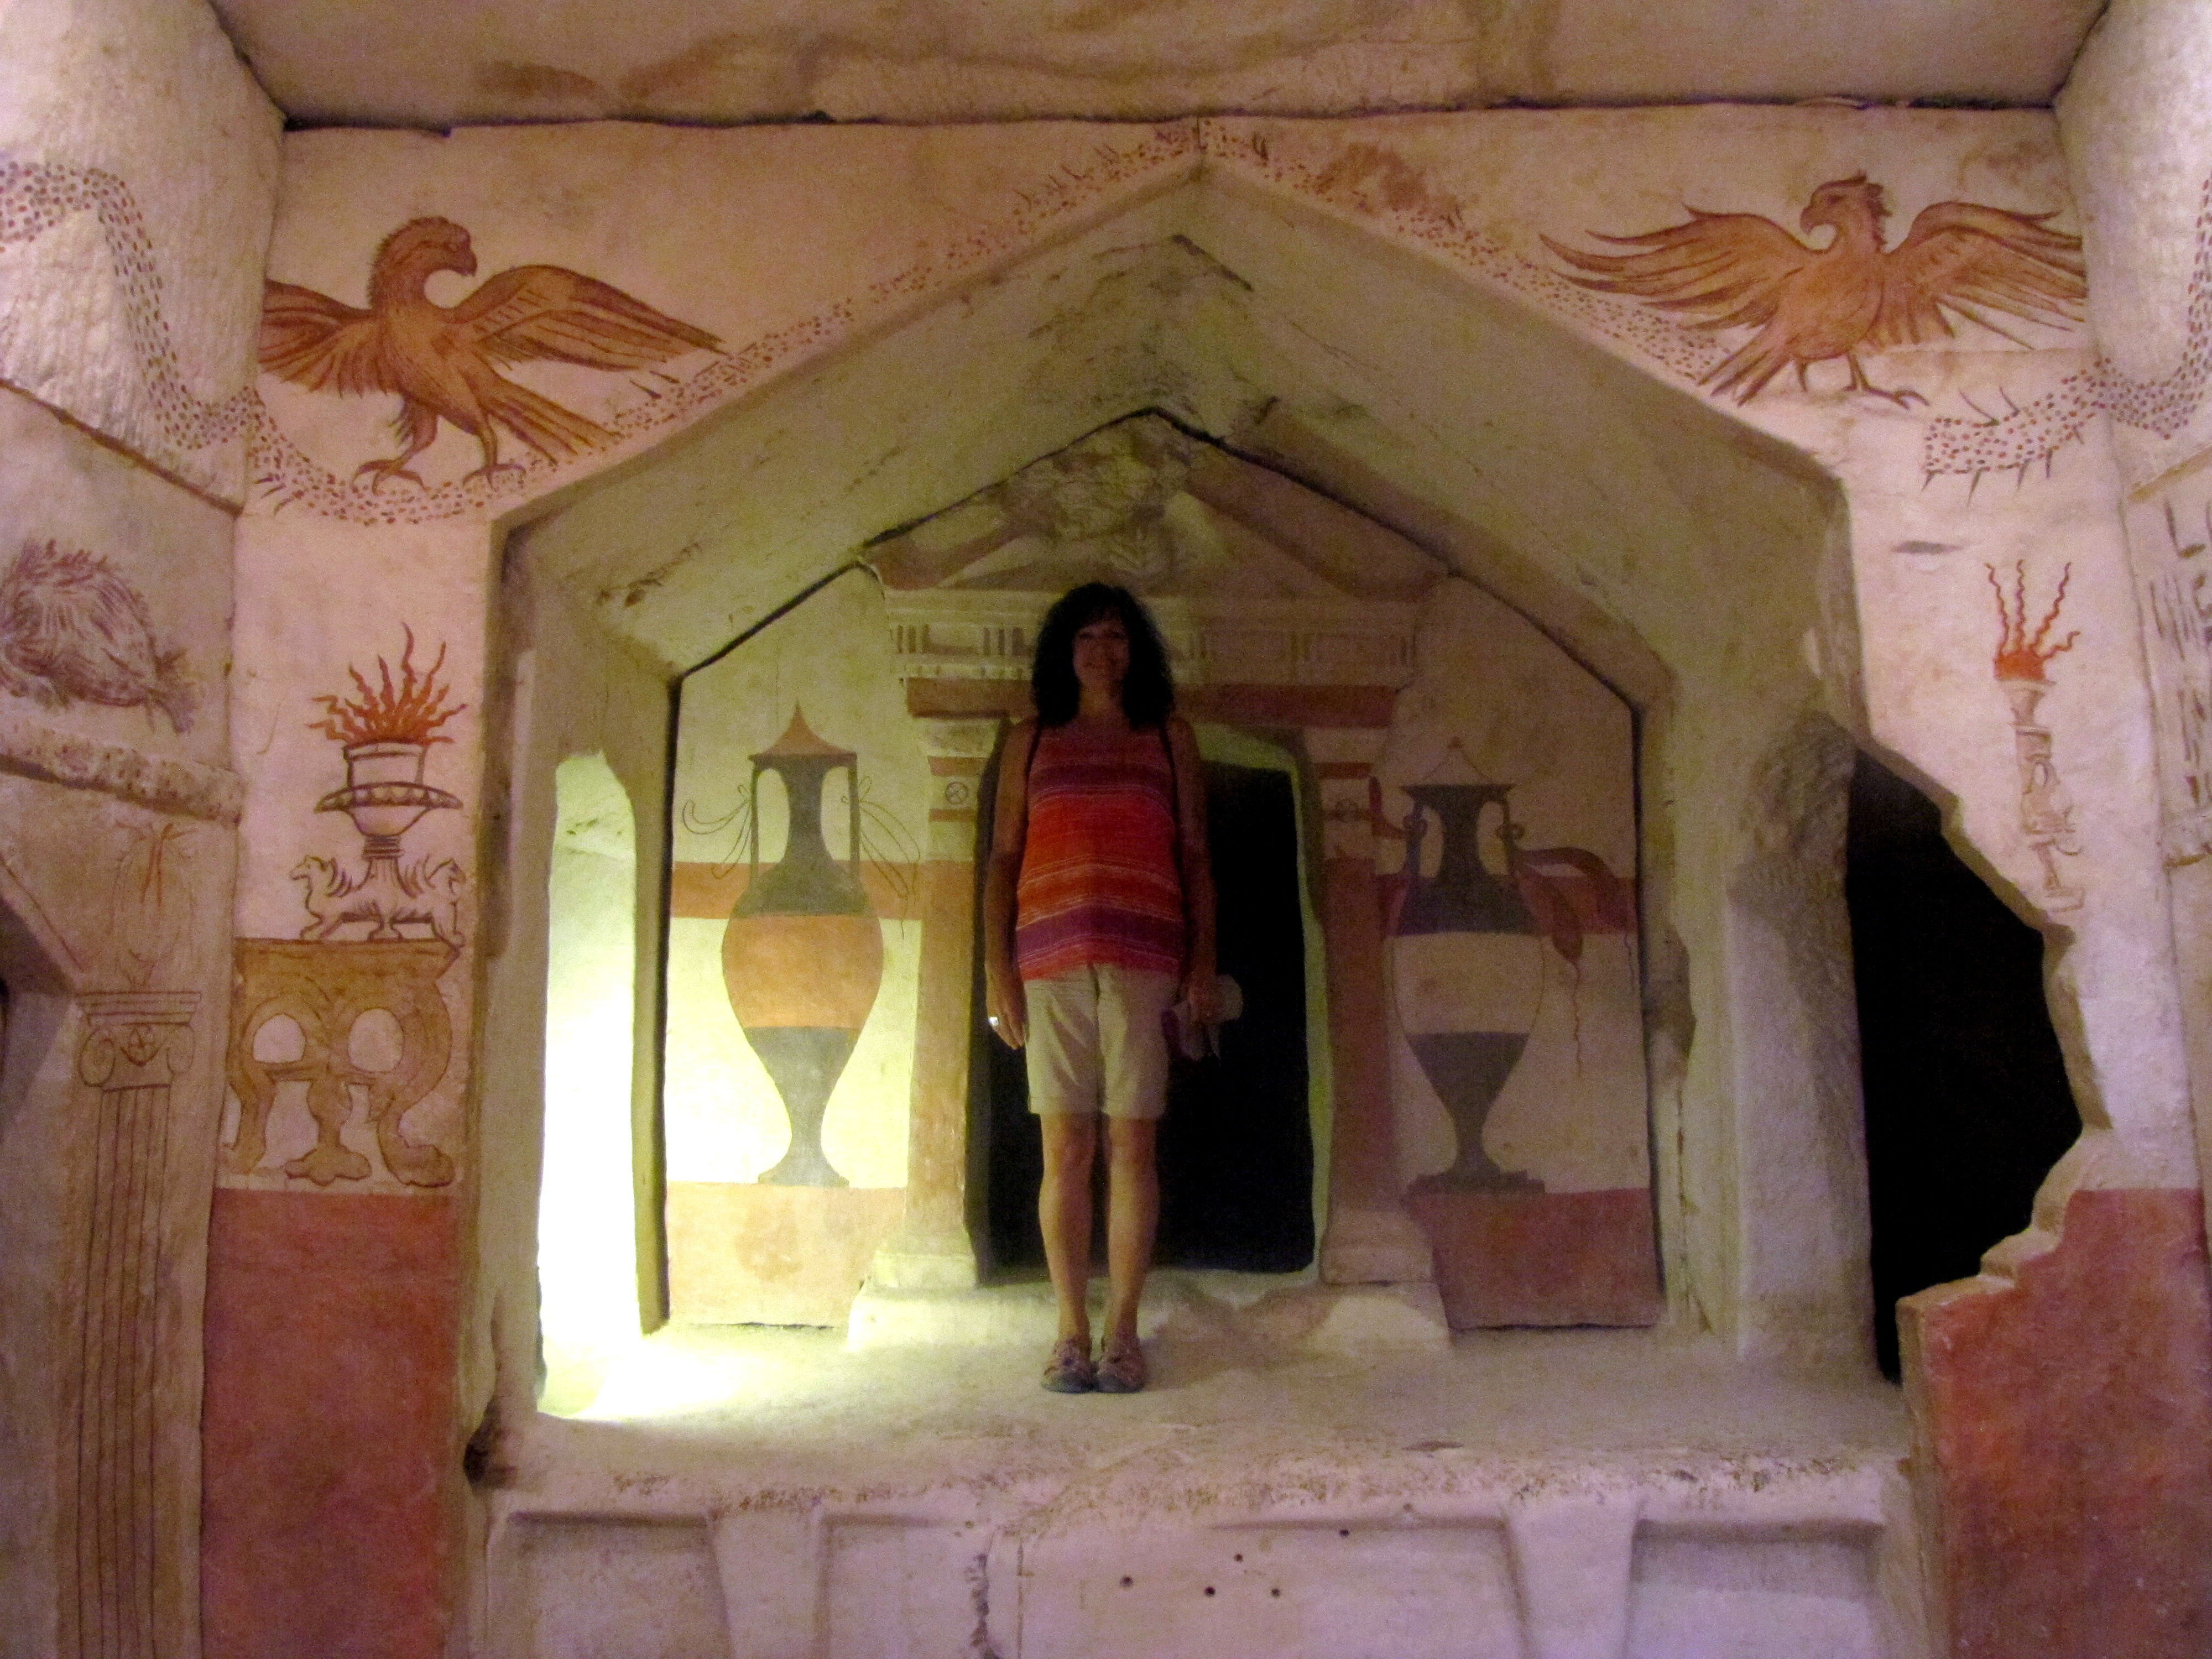 Toni in Sidonian Tomb at Beit-Guvrin, Mareshah